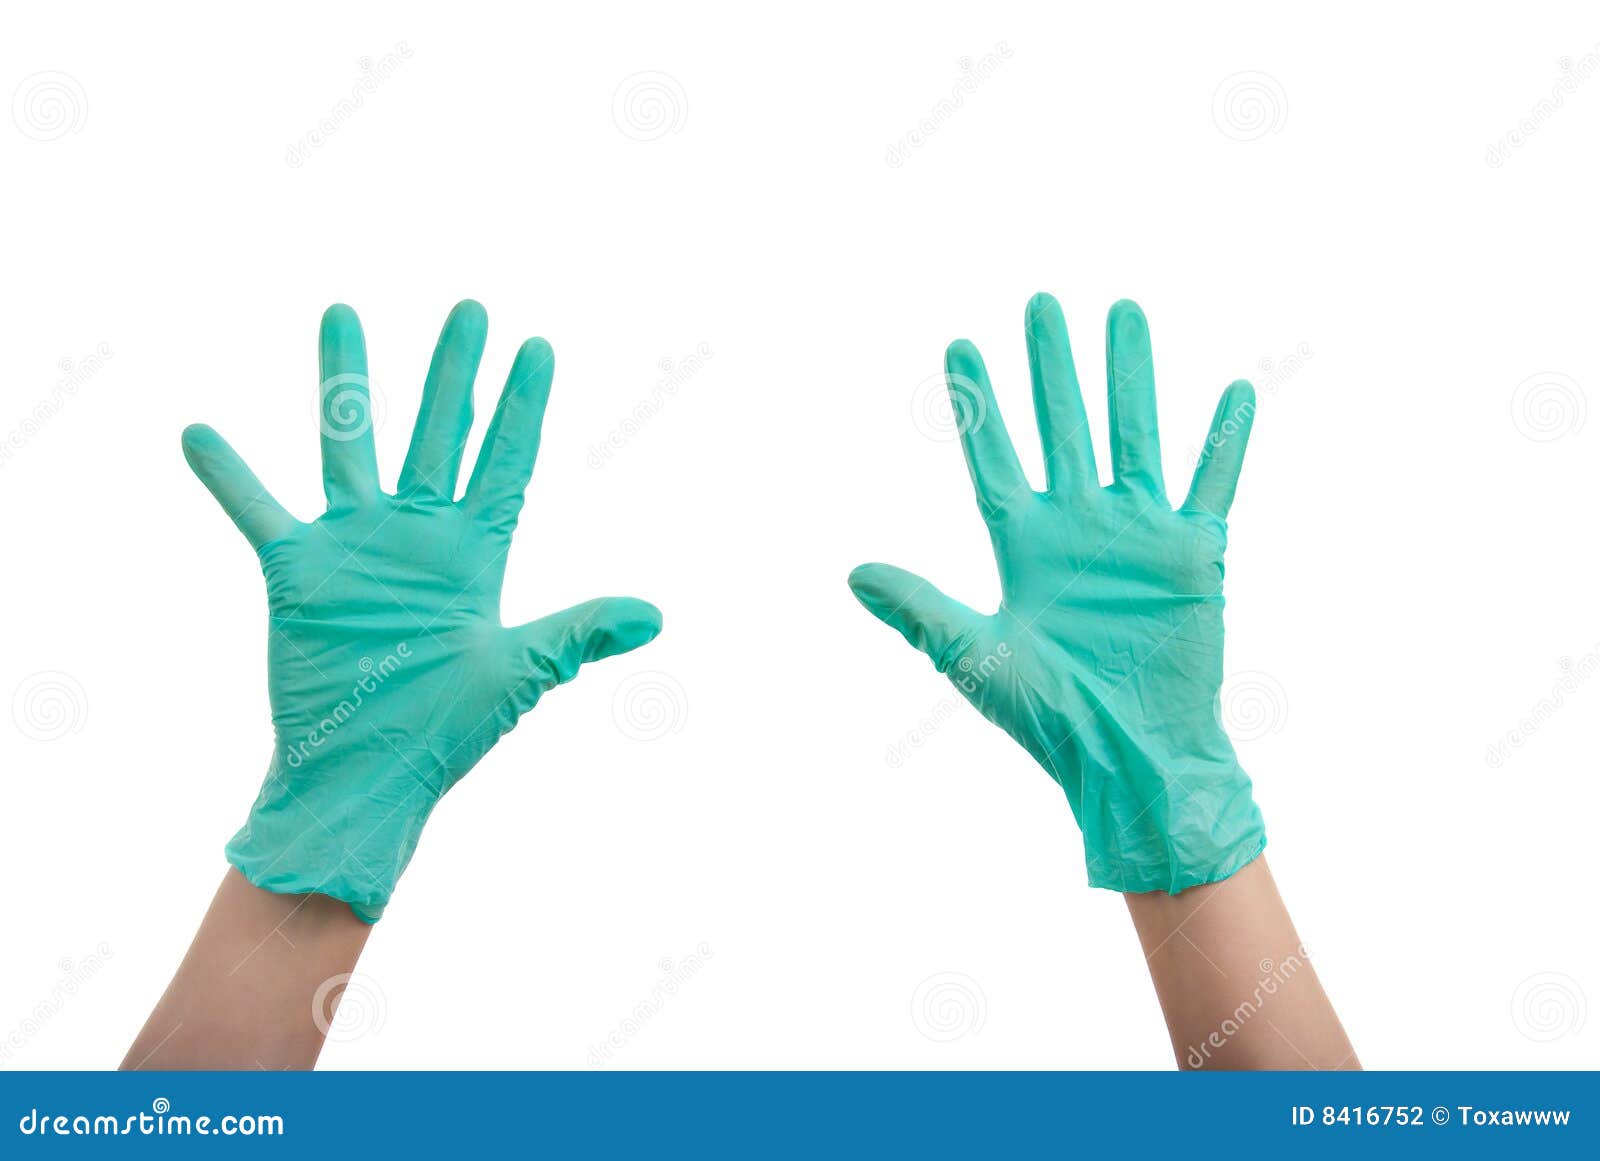 hands in surgical gloves